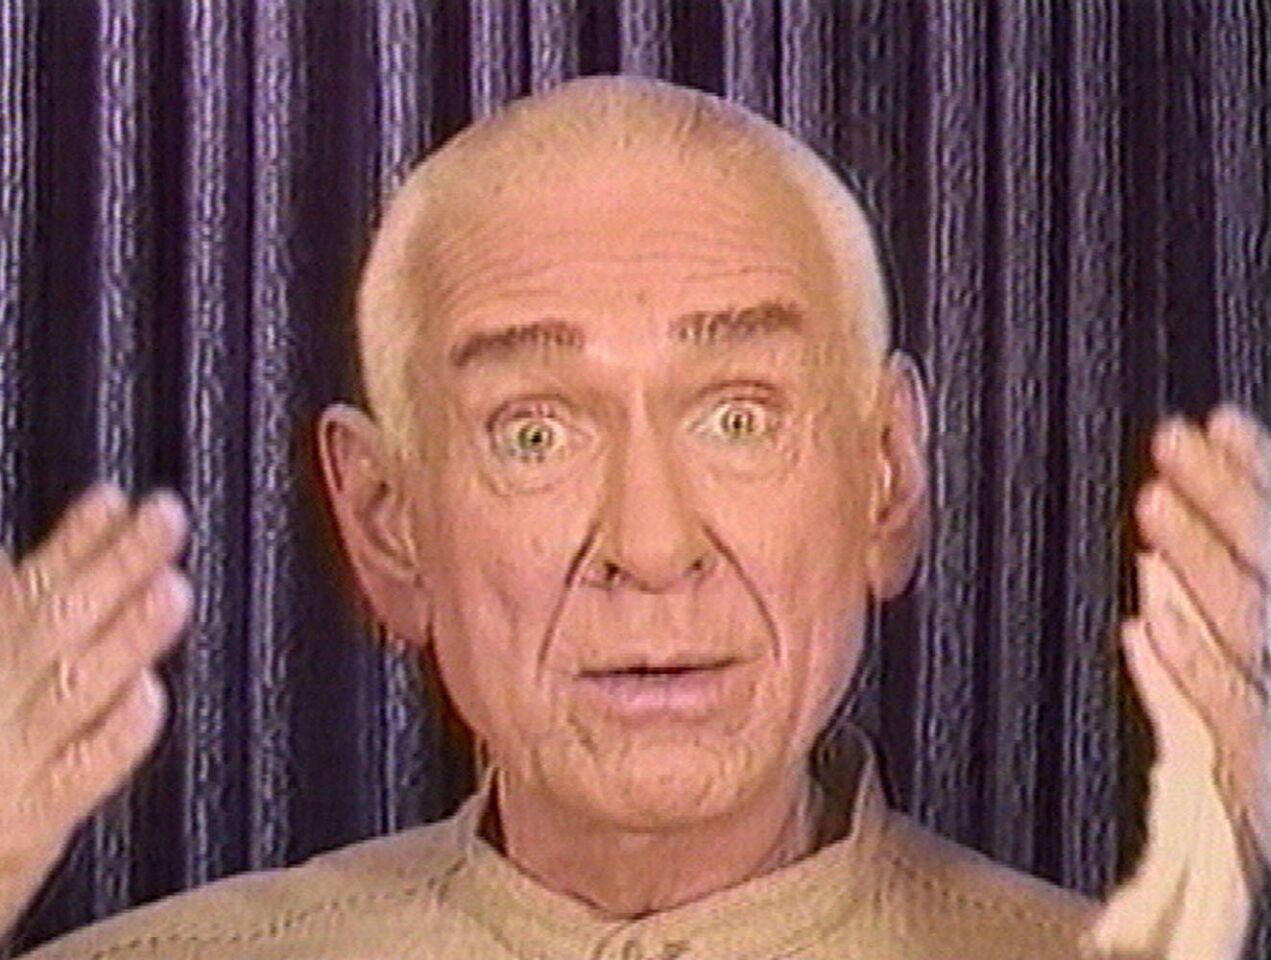 Marshall Applewhite, leader of the Heaven's Gate cult, is shown in an undated image.